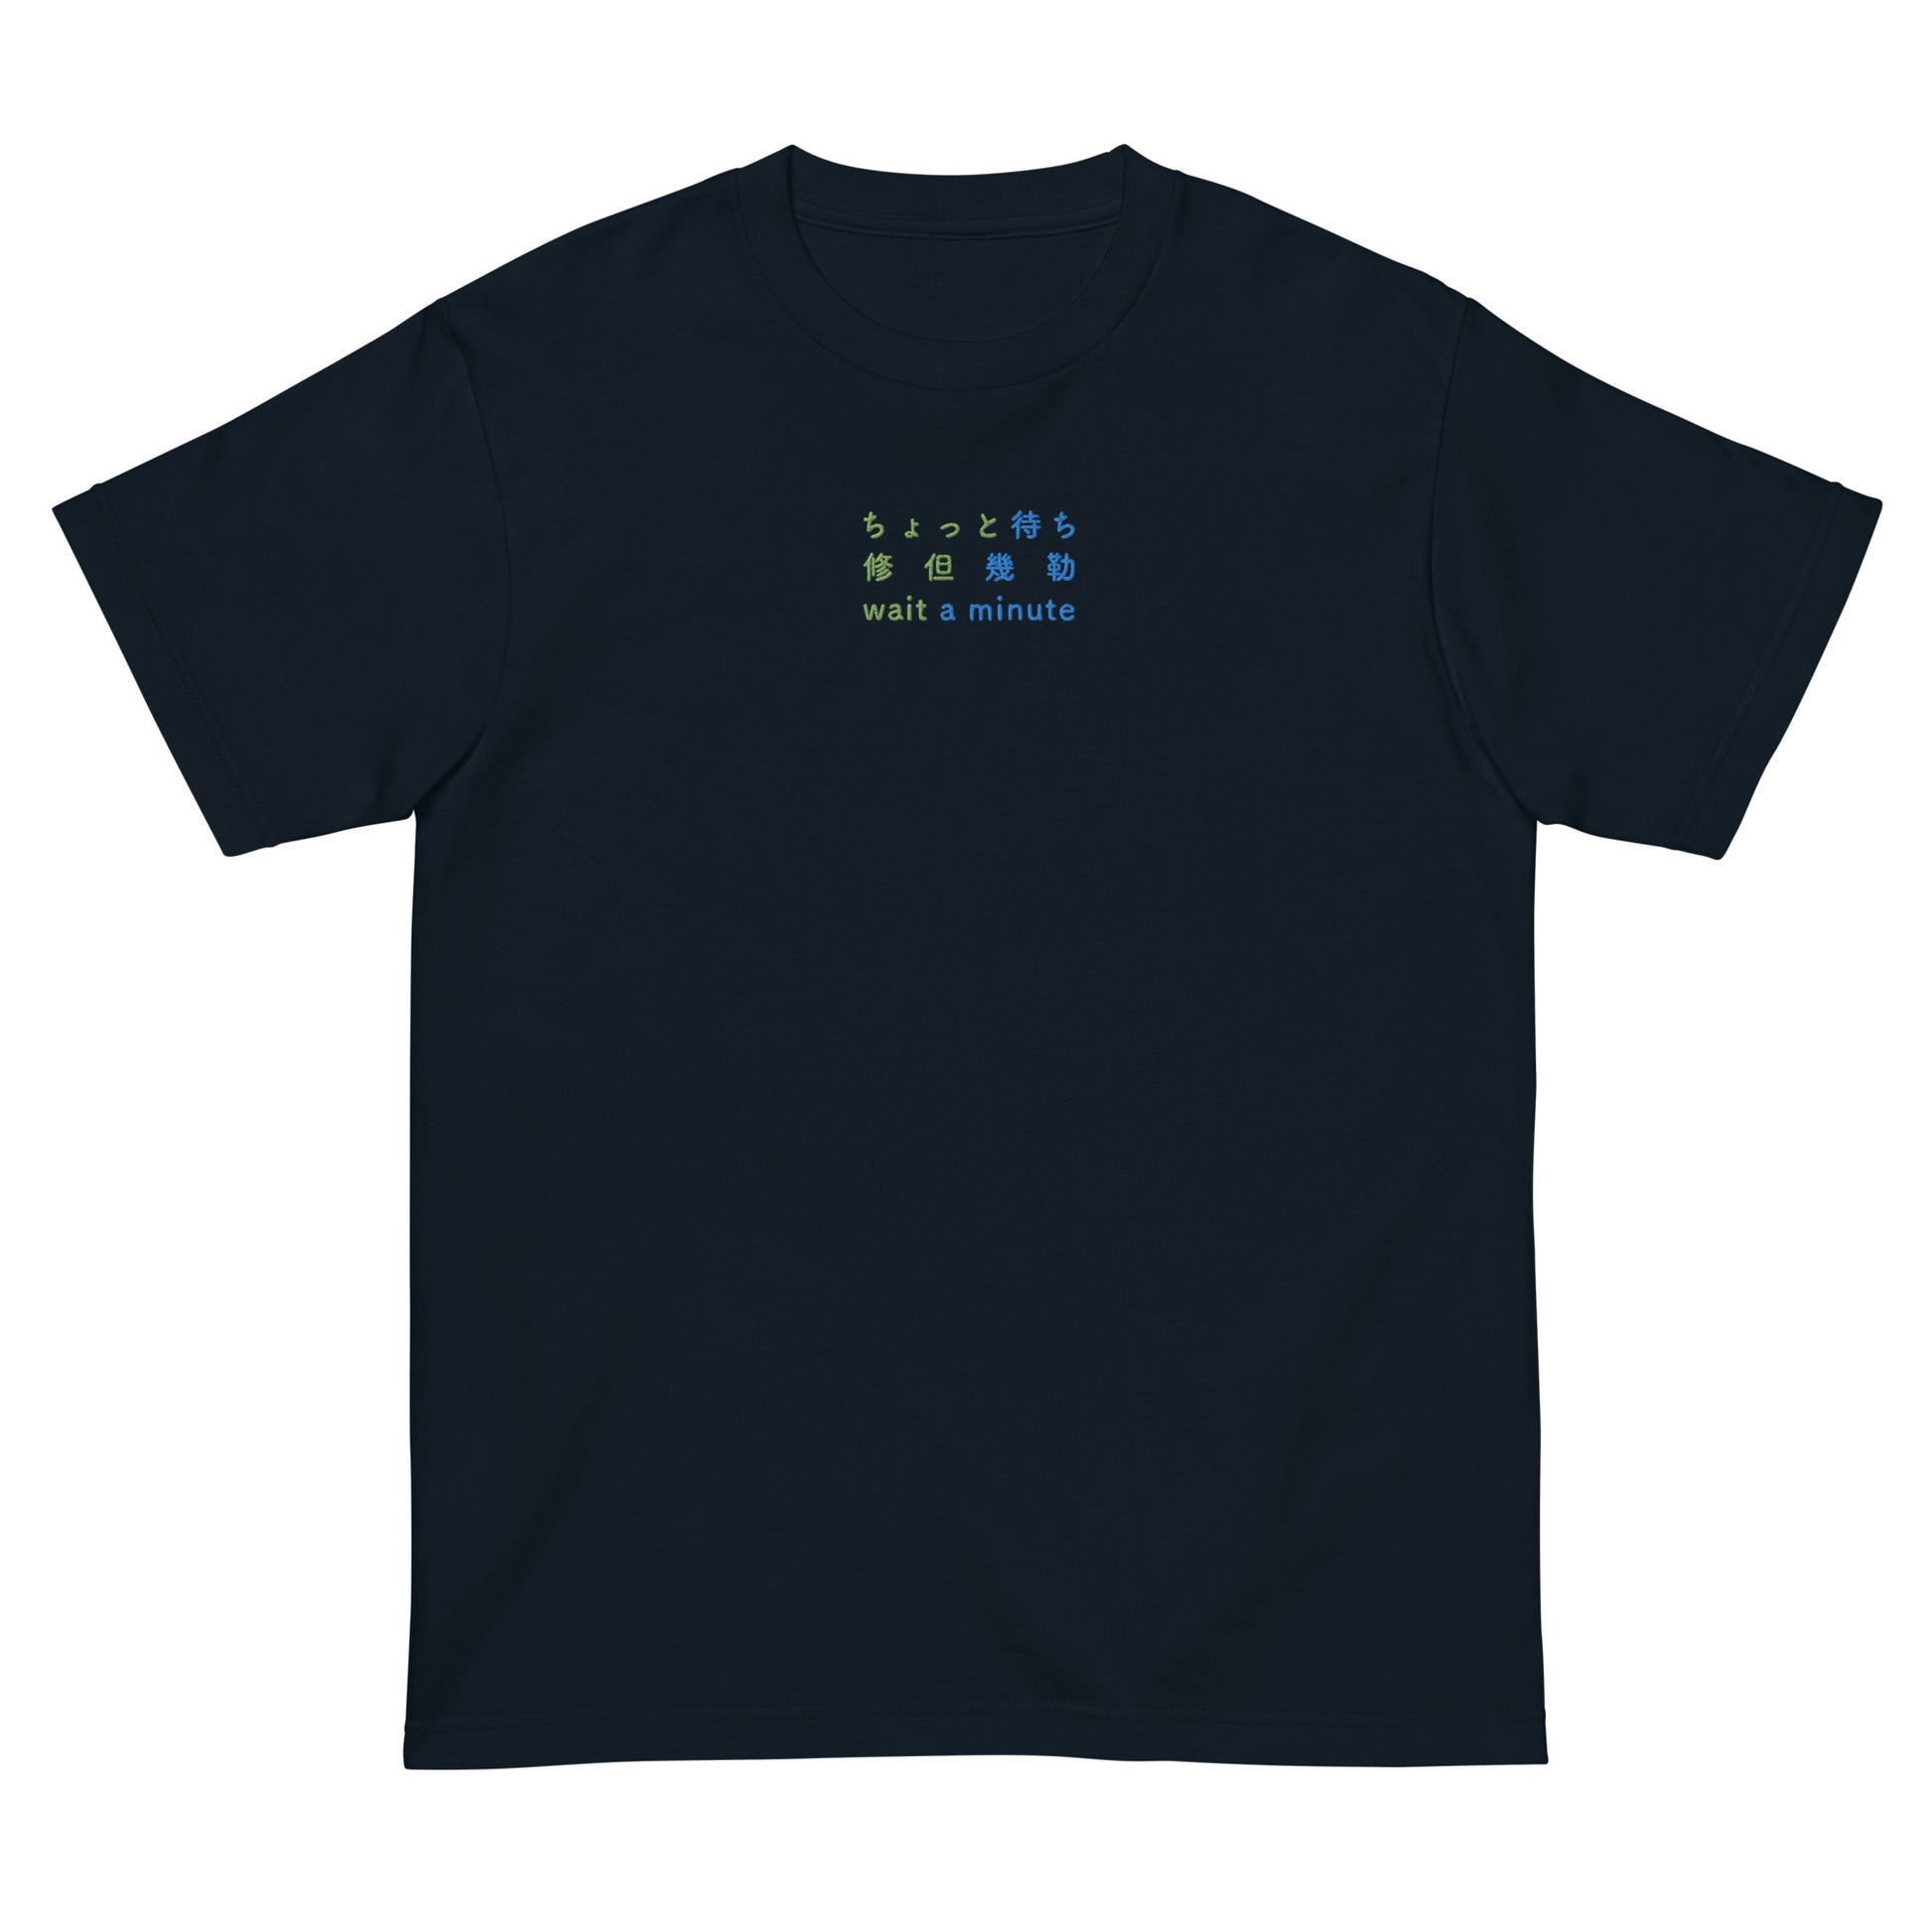 Navy High Quality Tee - Front Design with an Green, Blue Embroidery "Wait A Minute" in Japanese,Chinese and English Edit alt text